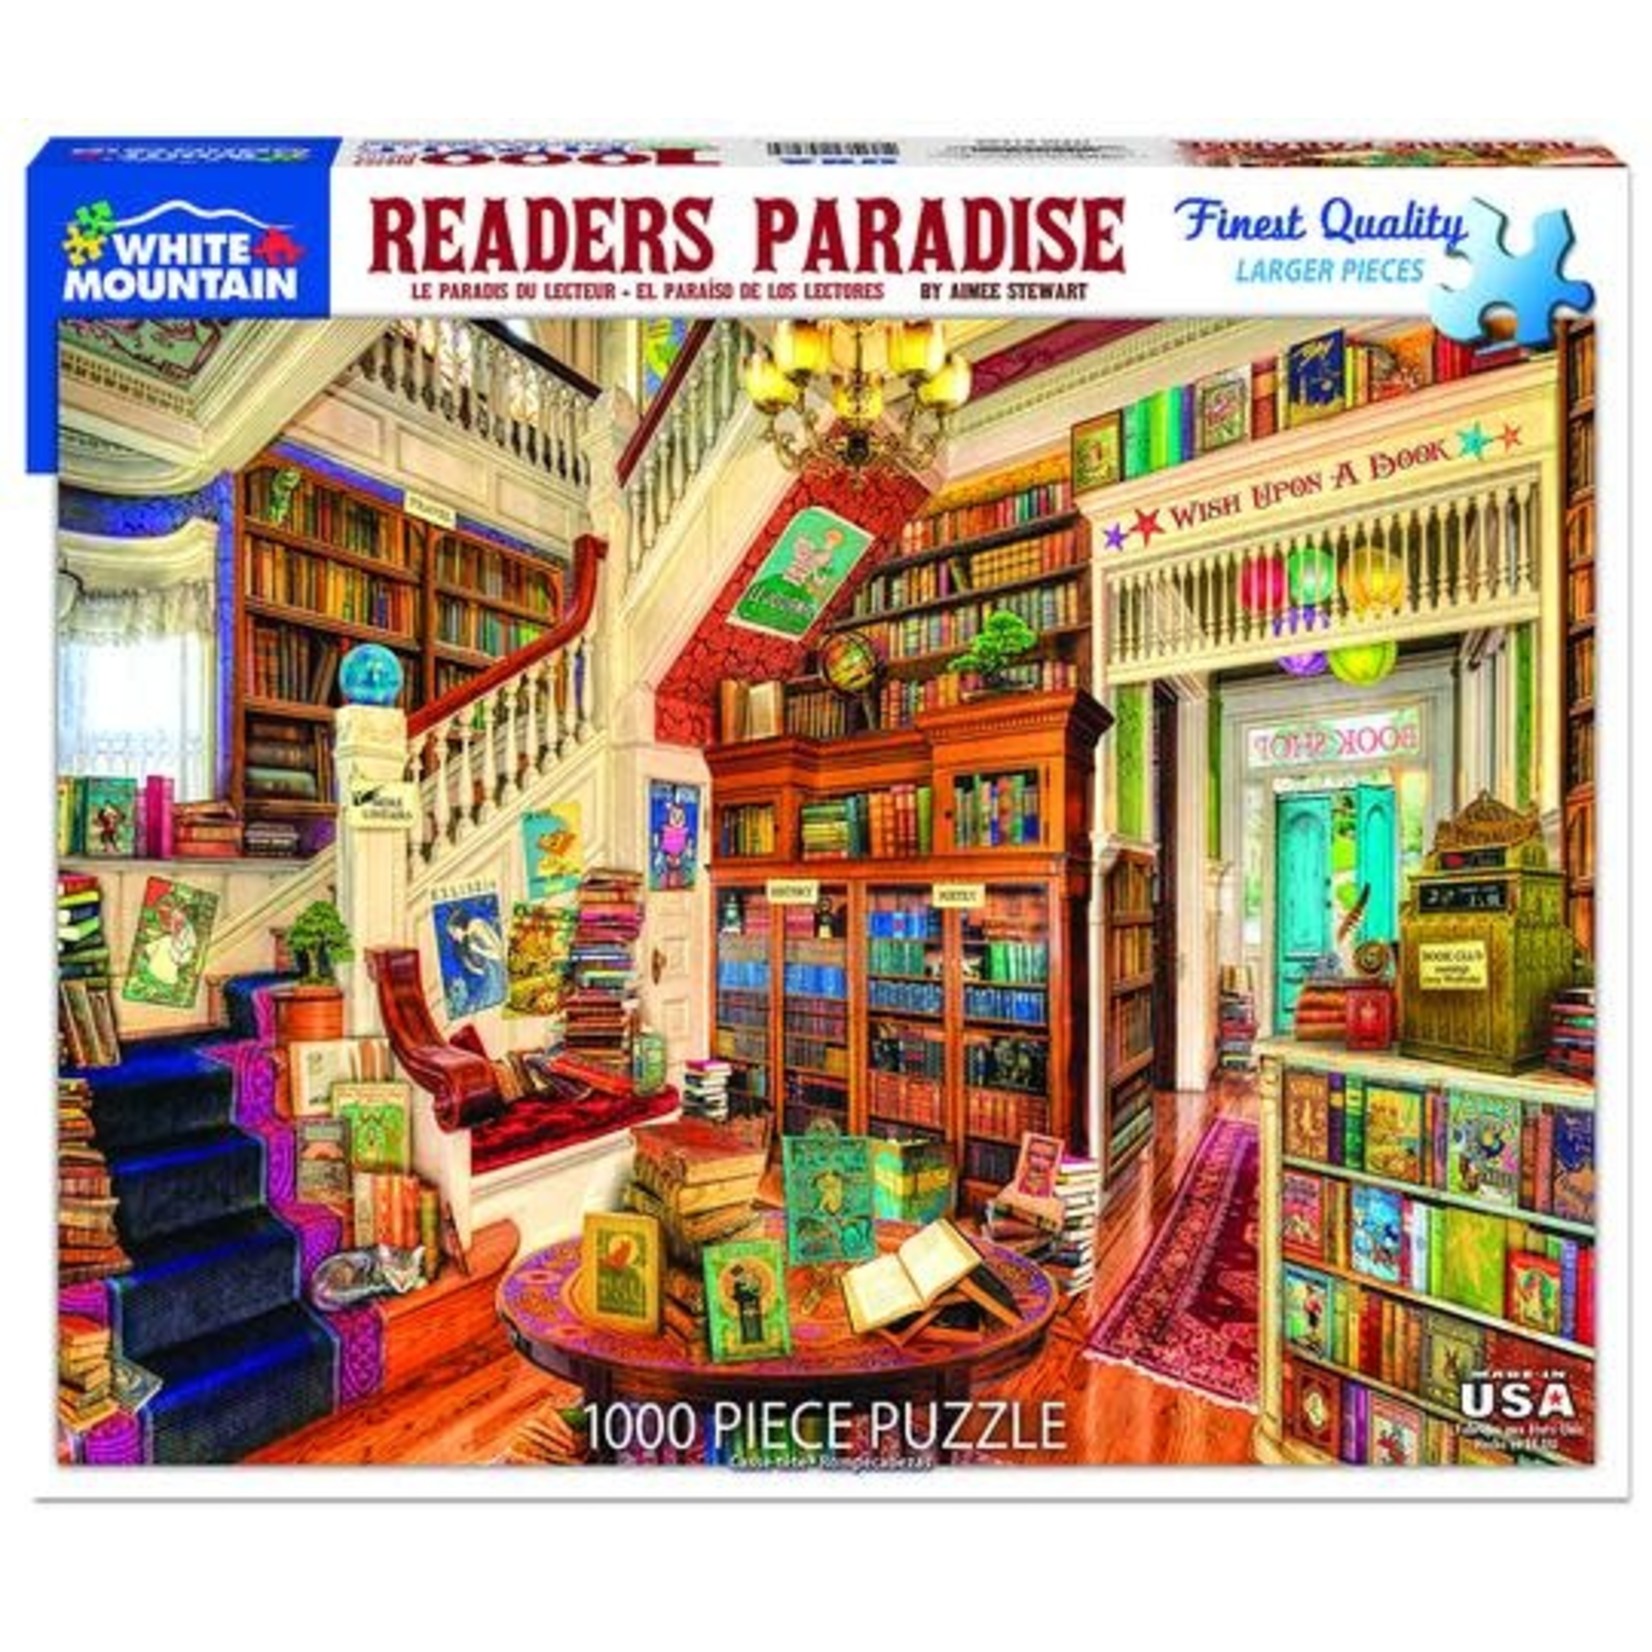 READERS PARADISE PUZZLE